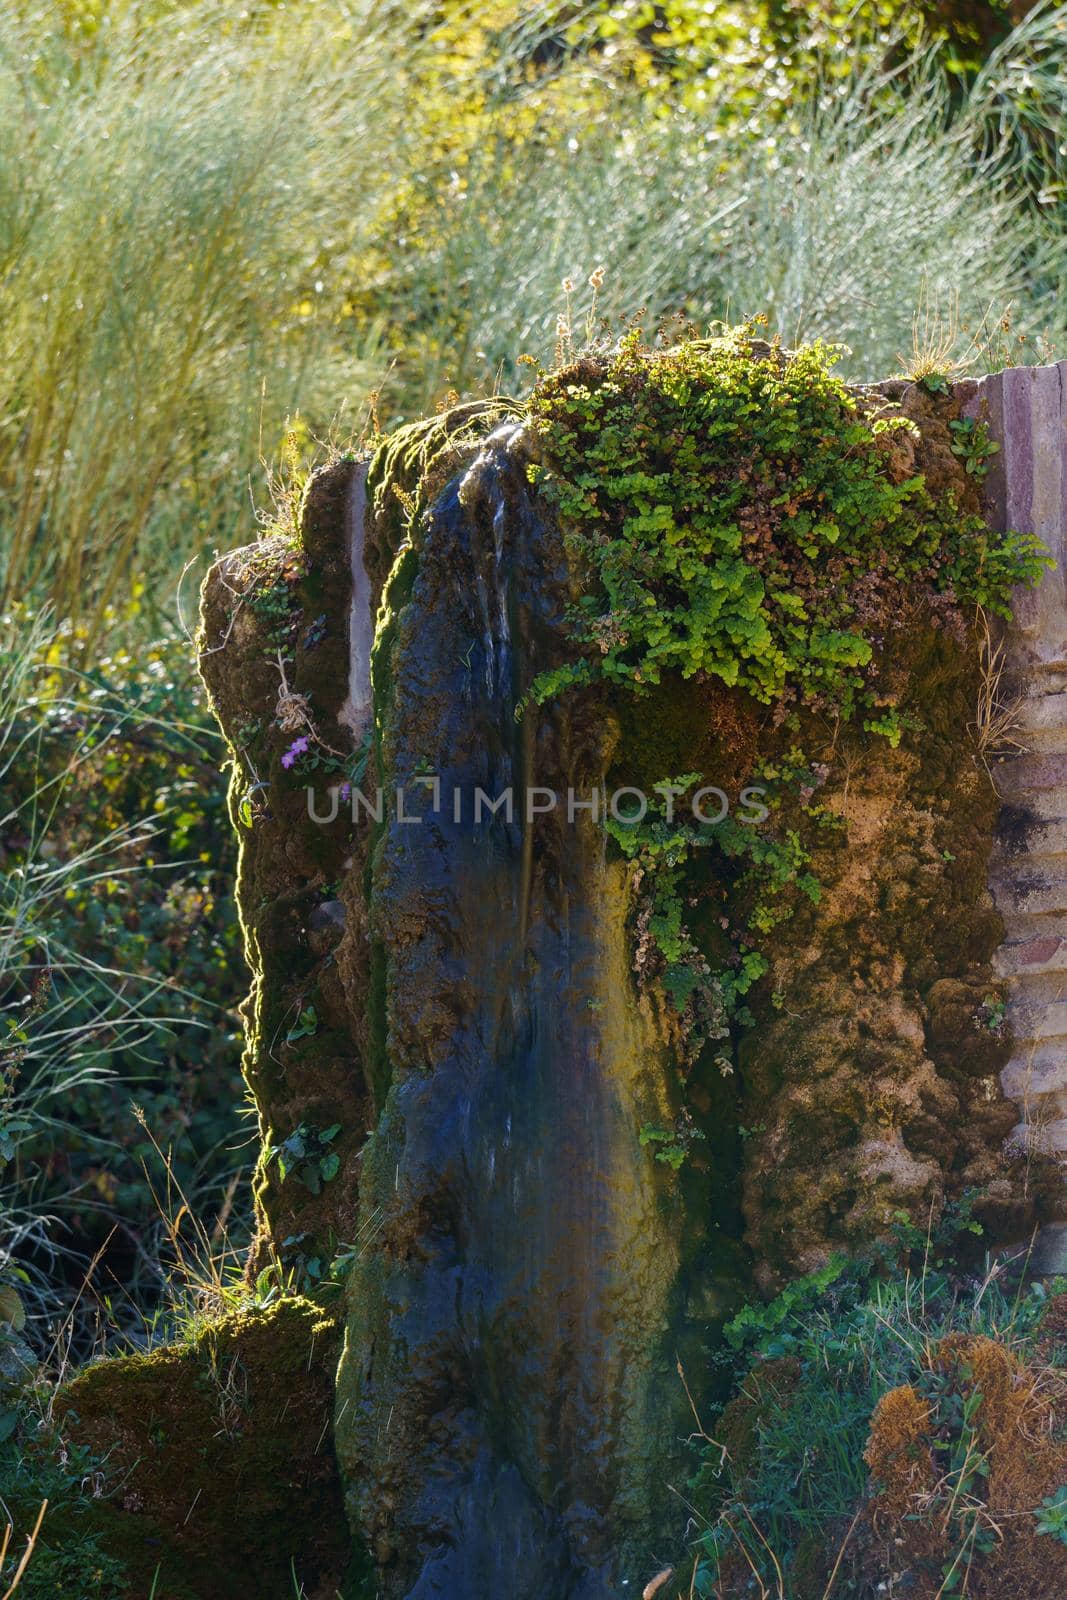 watering place for livestock with moss and aquatic plants with fresh spring water